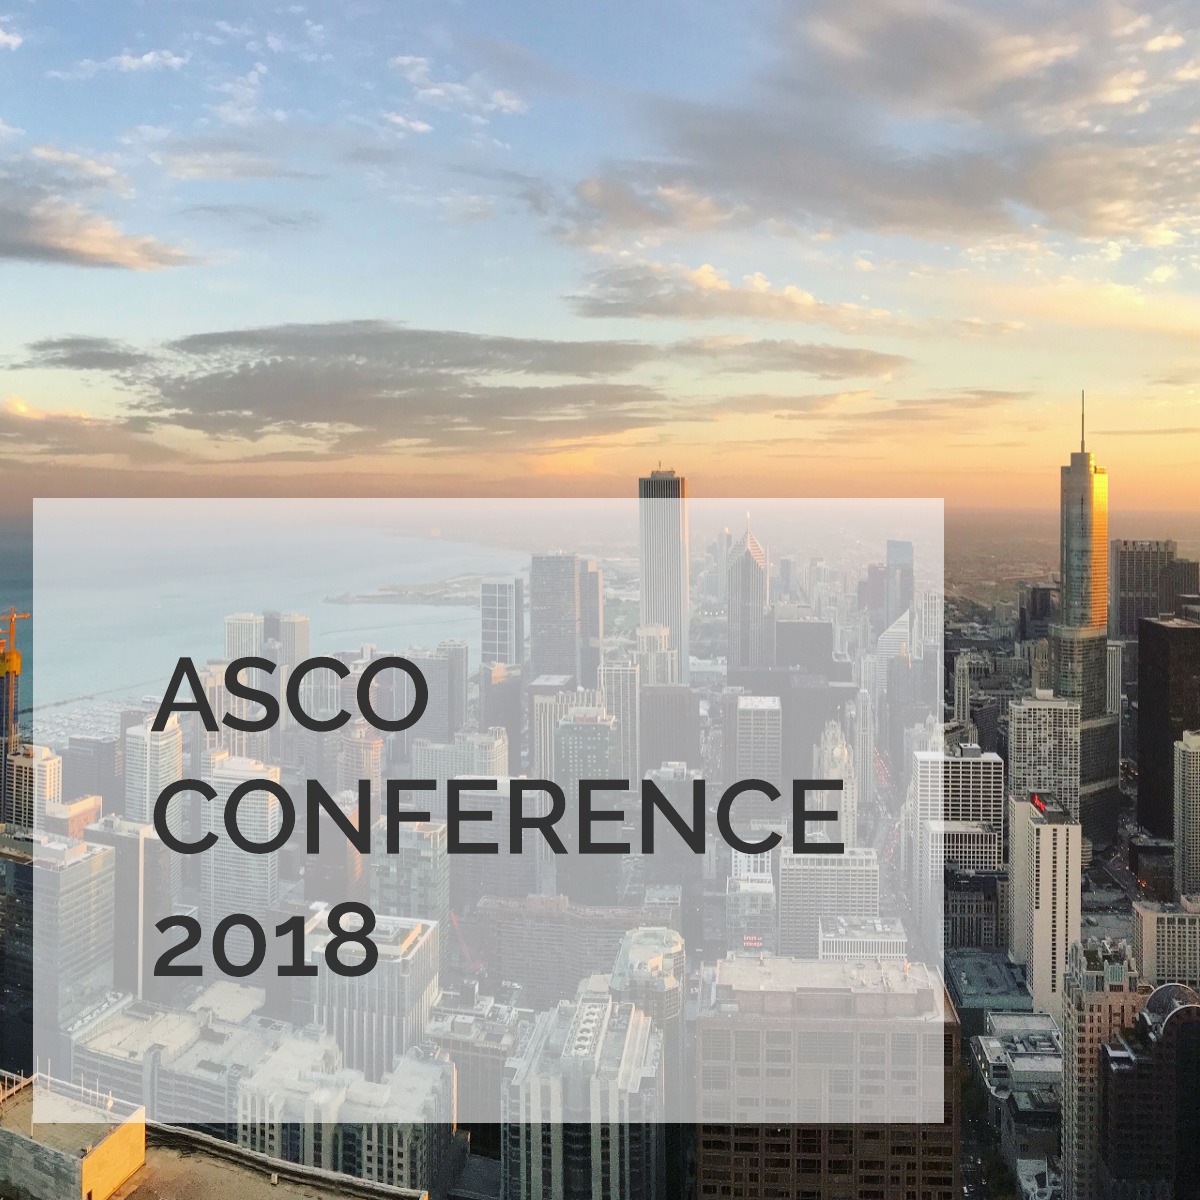 Research highlights from ASCO’s 2018 Annual Meeting